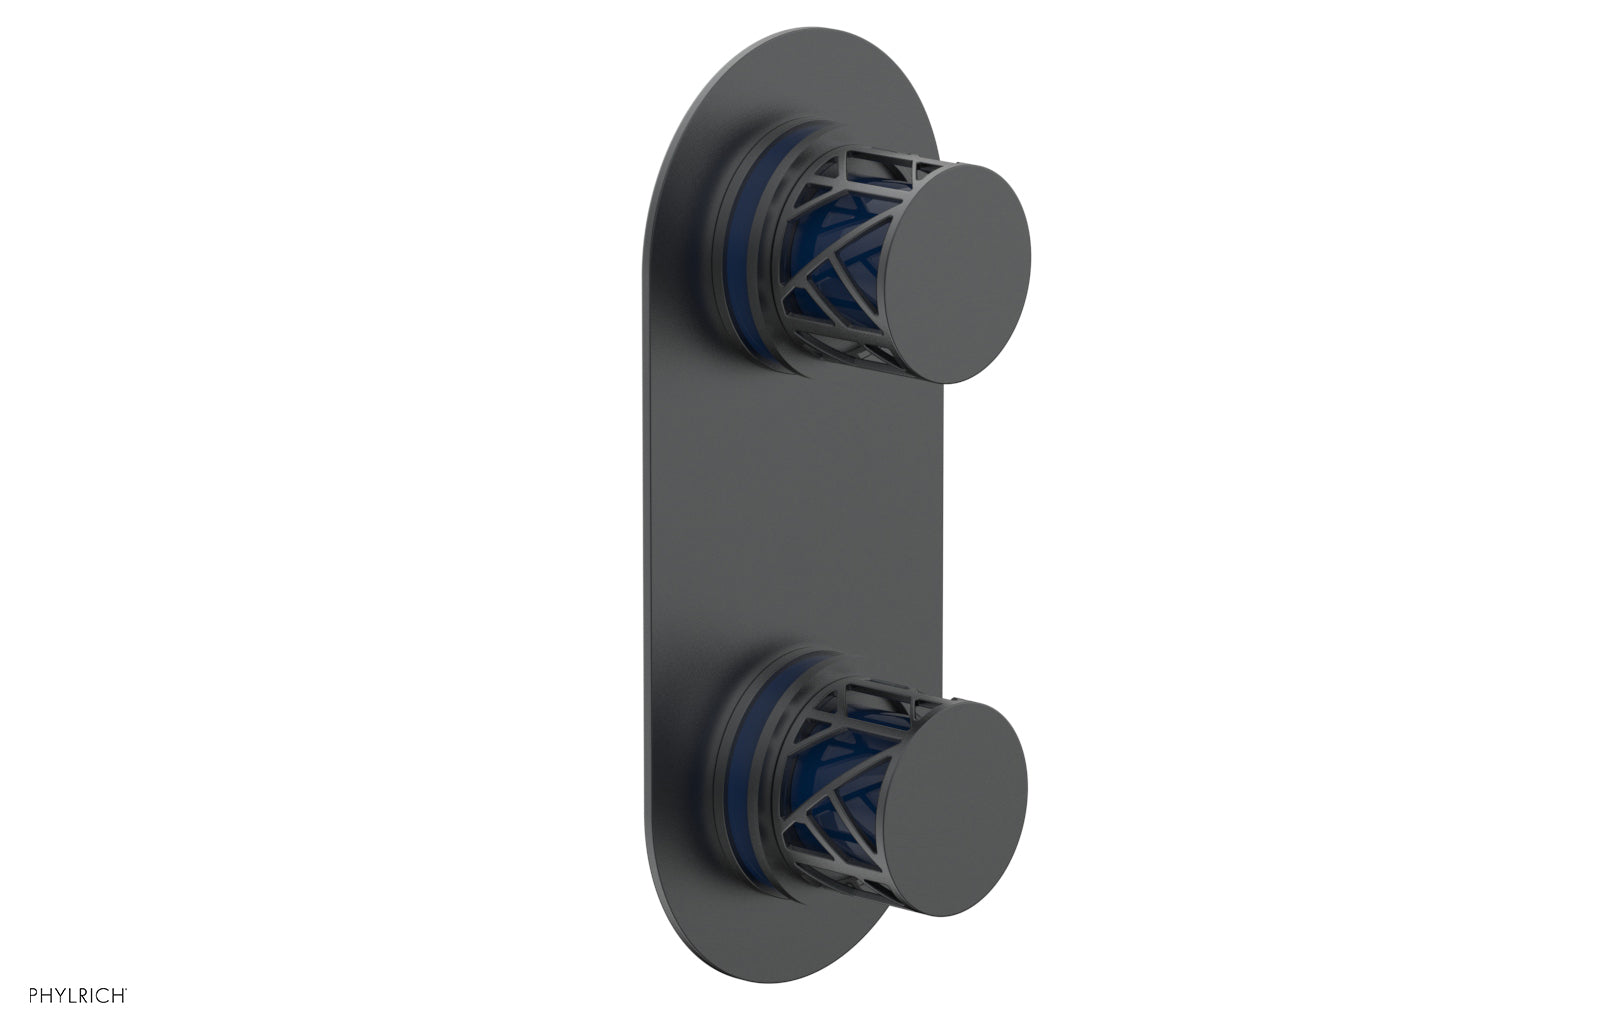 Phylrich JOLIE Thermostatic Valve with Volume Control or Diverter with "Navy Blue" Accents